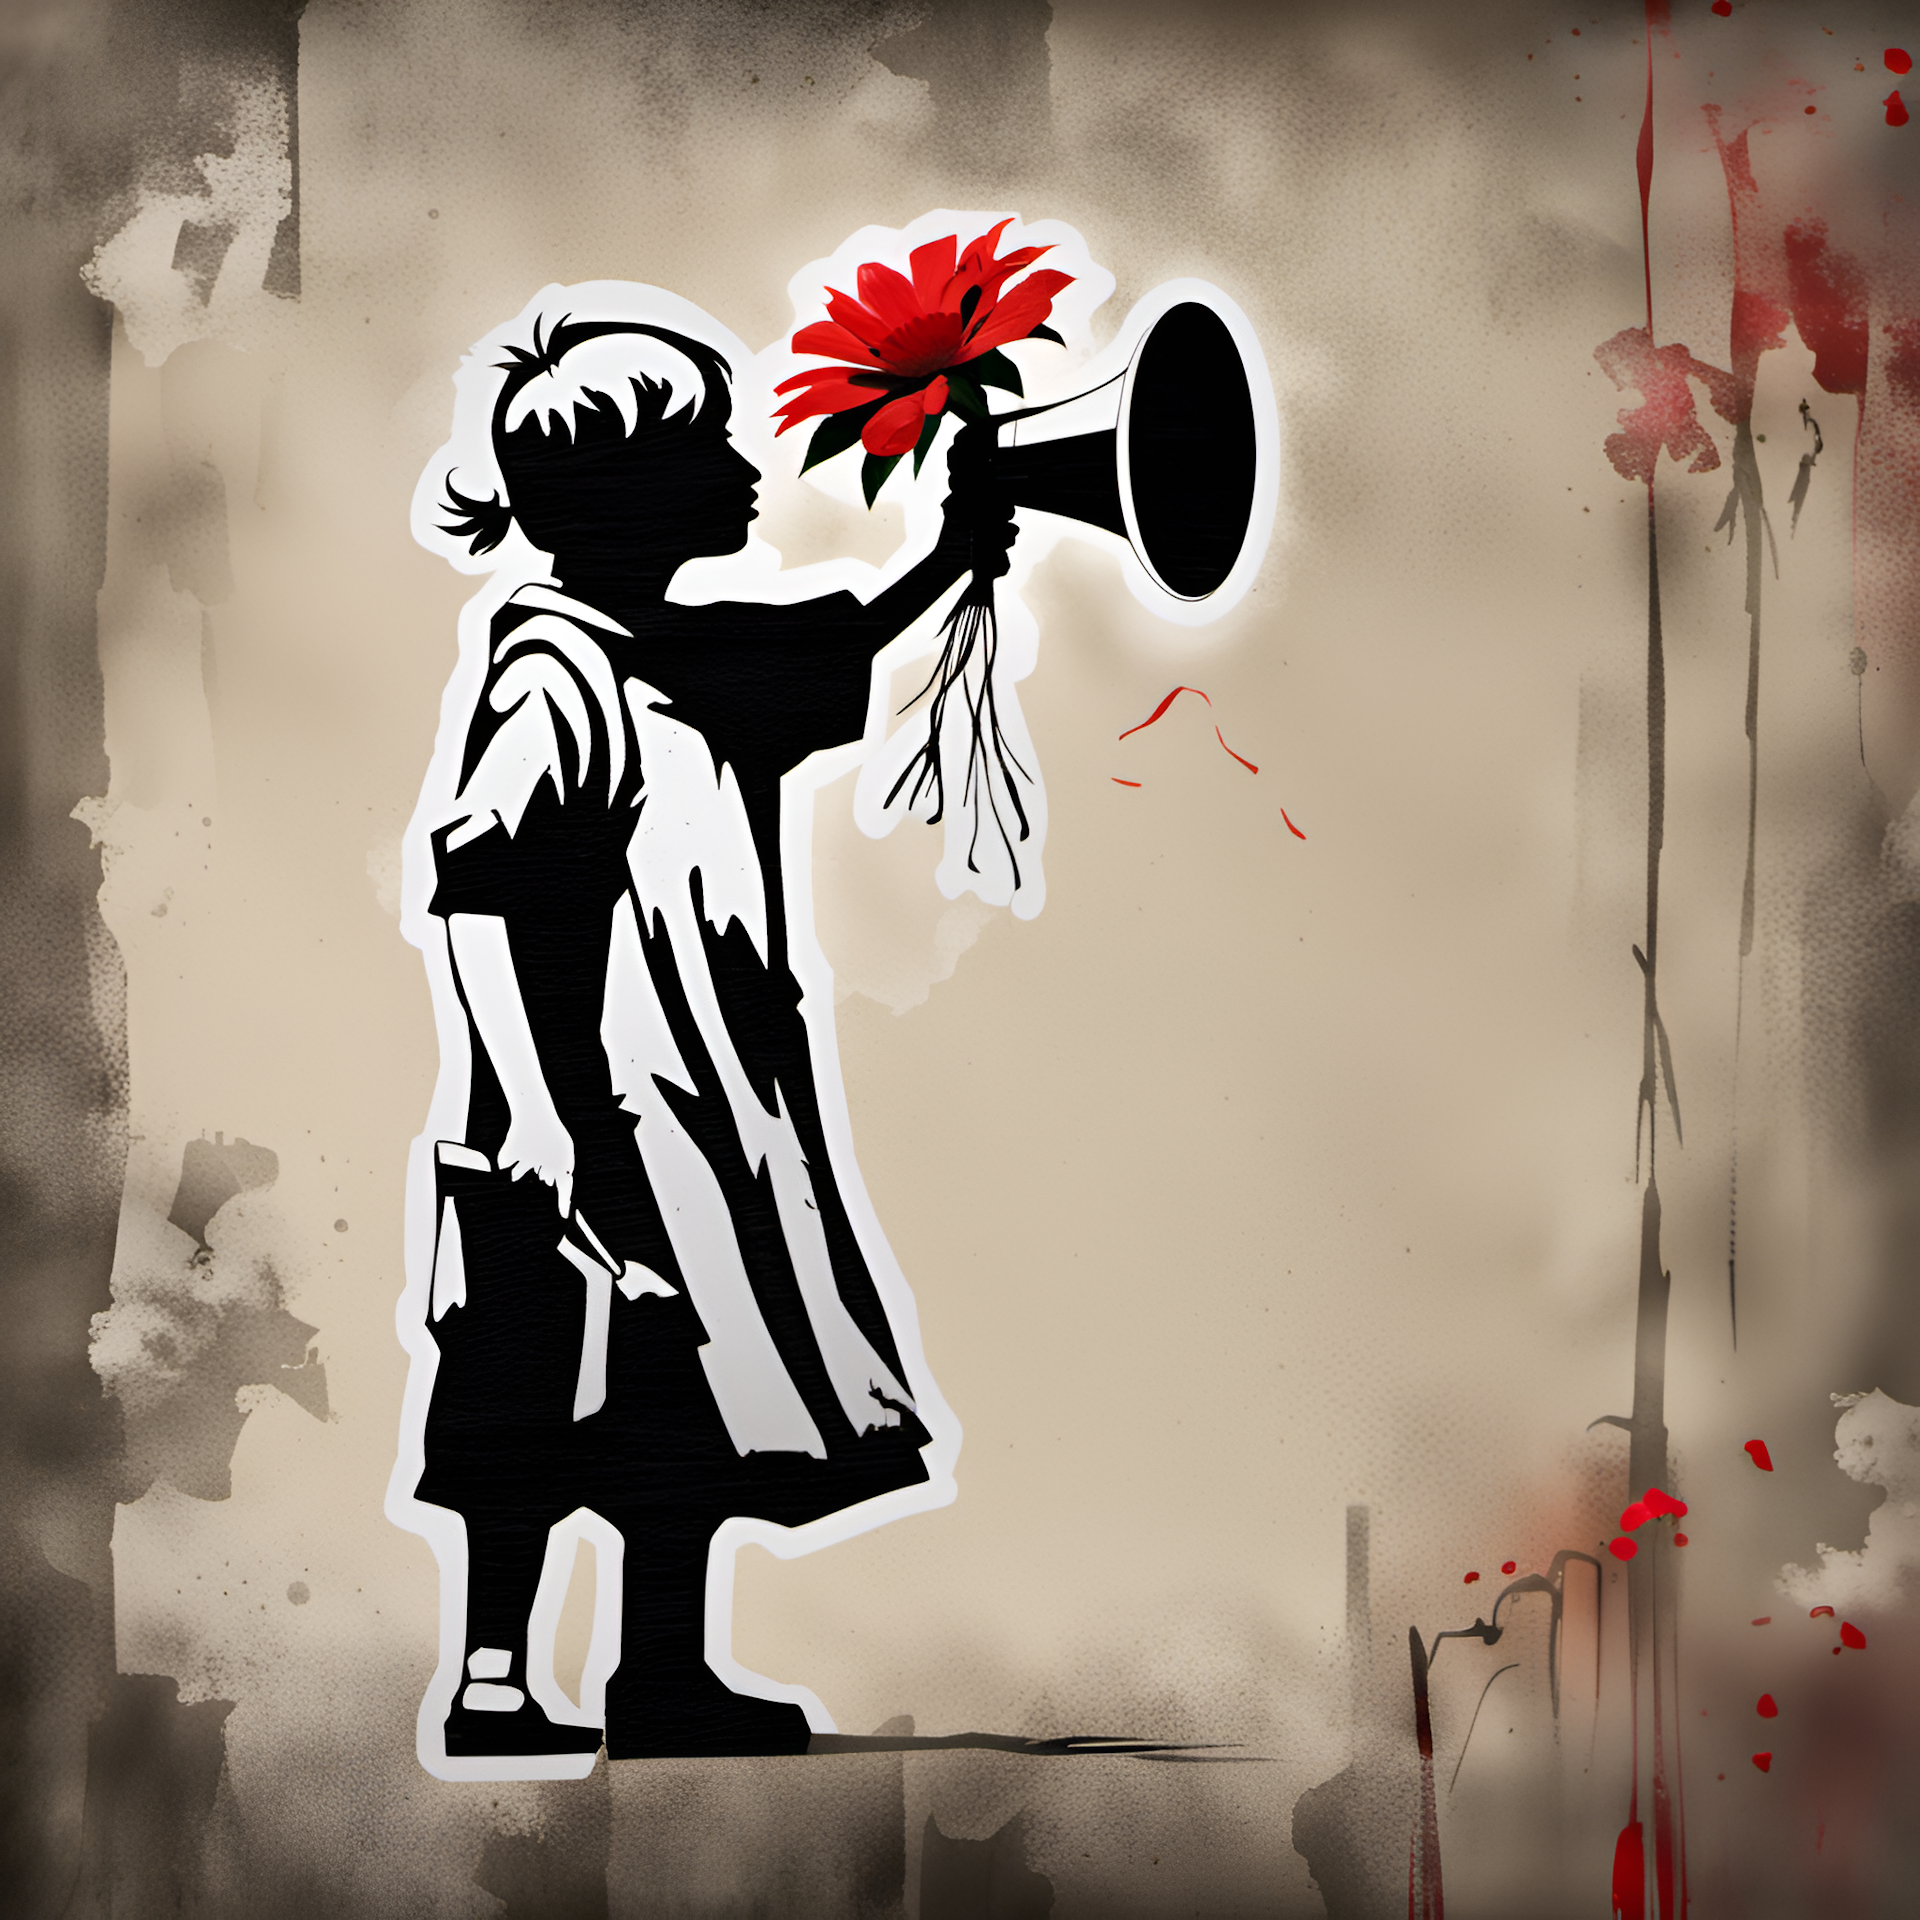 Young person holding a bullhorn and a red flower in the style of Banksy.